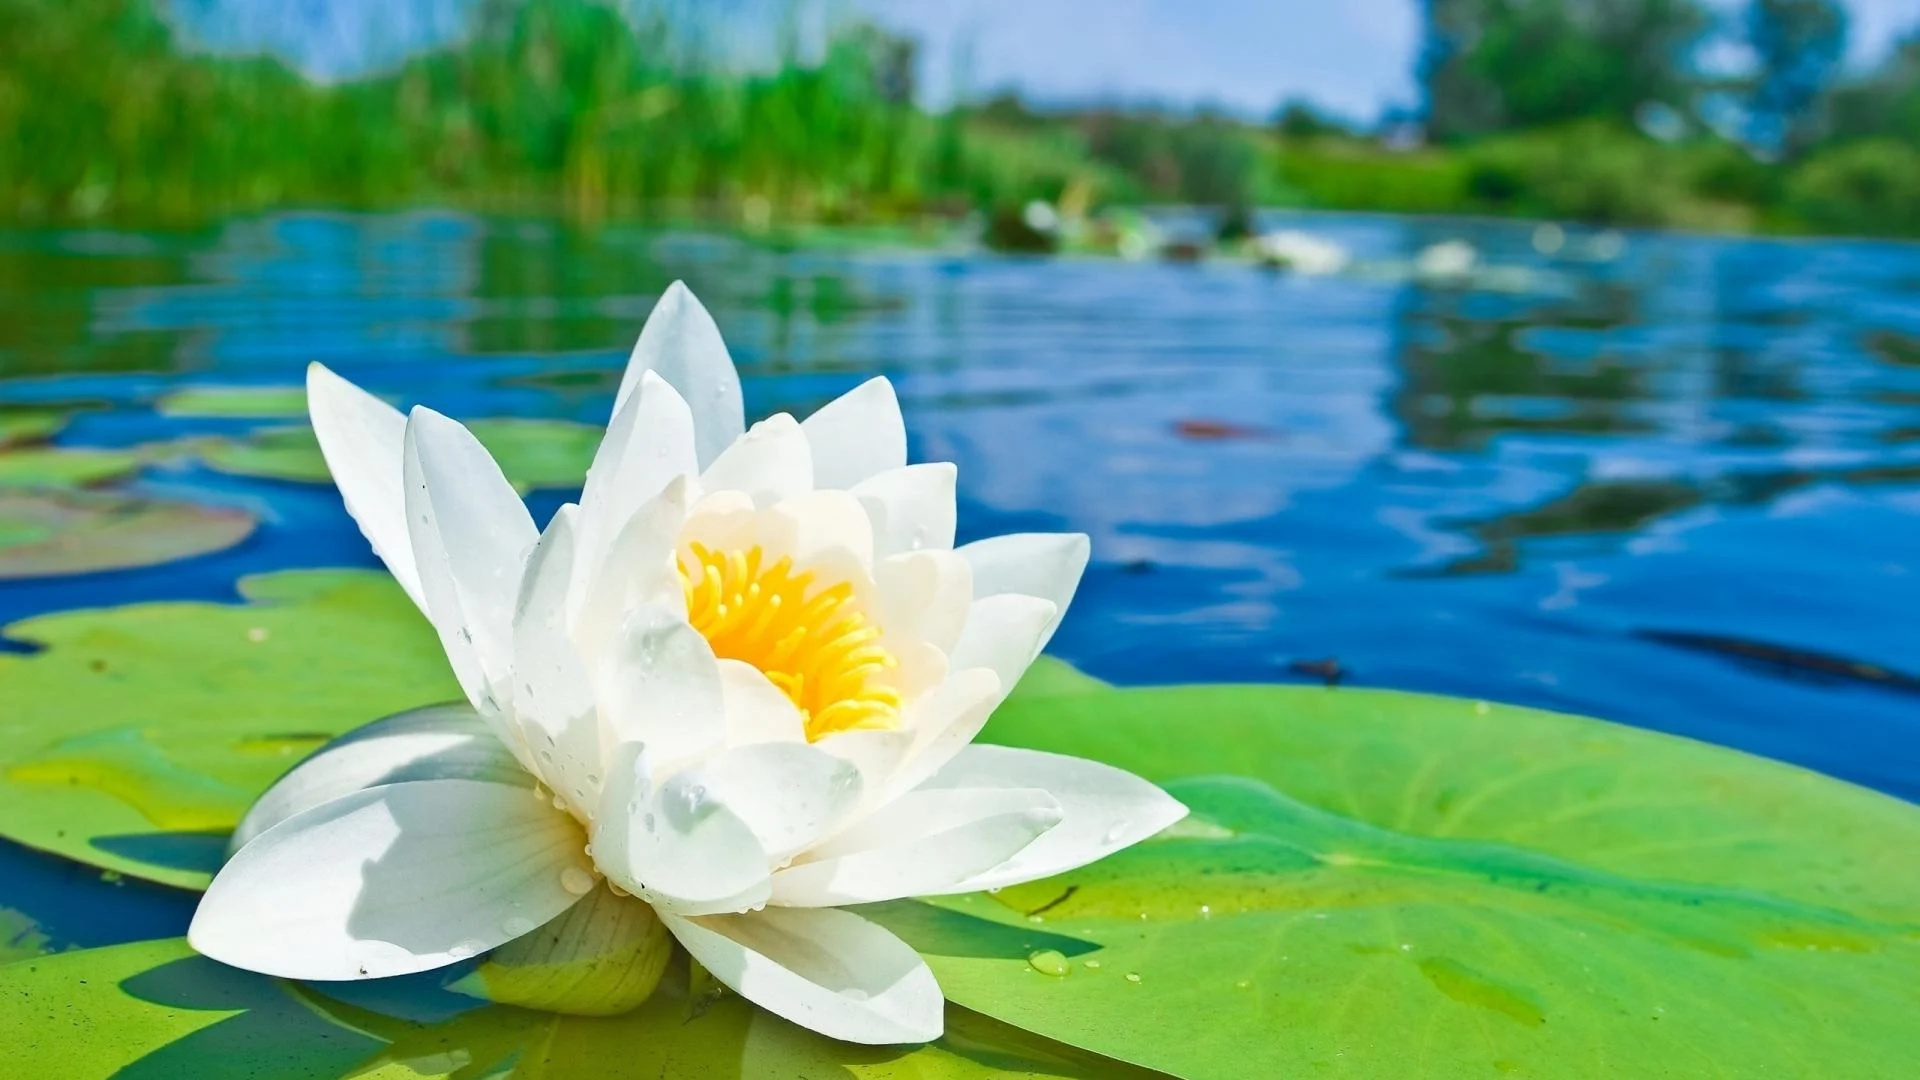 Nature, blurred background, lily pads, water lilies, 1920x1080 Full HD Desktop